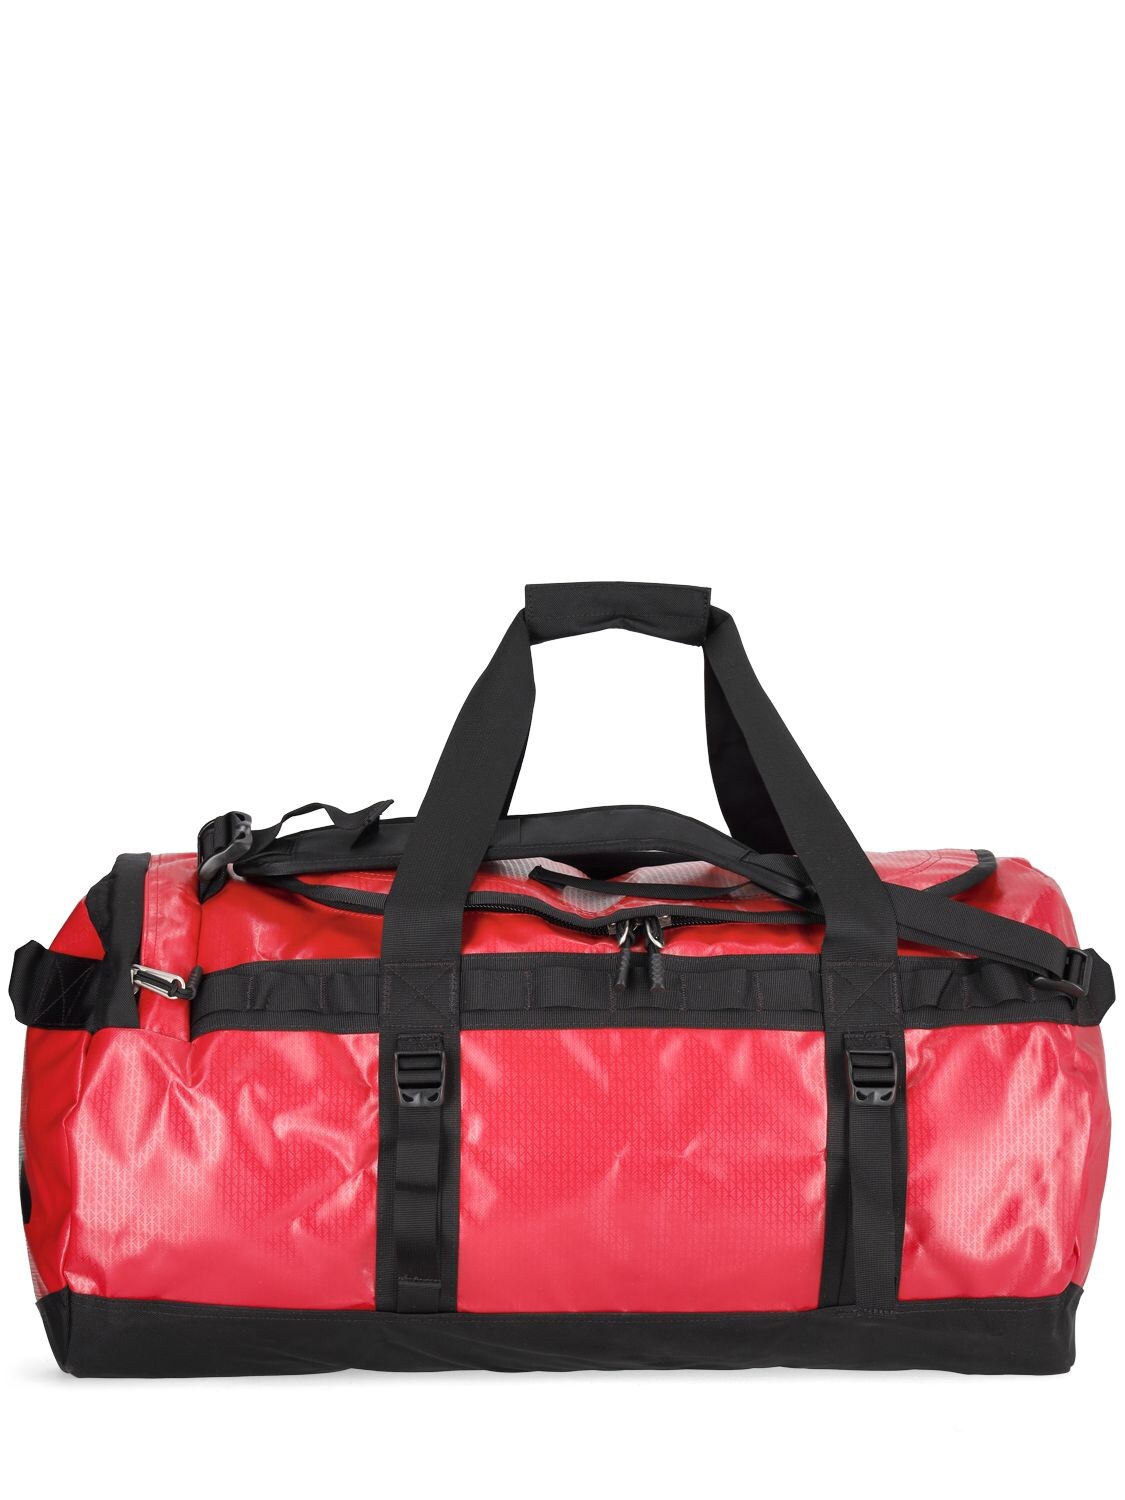 THE NORTH FACE 71l Base Camp Duffle Bag